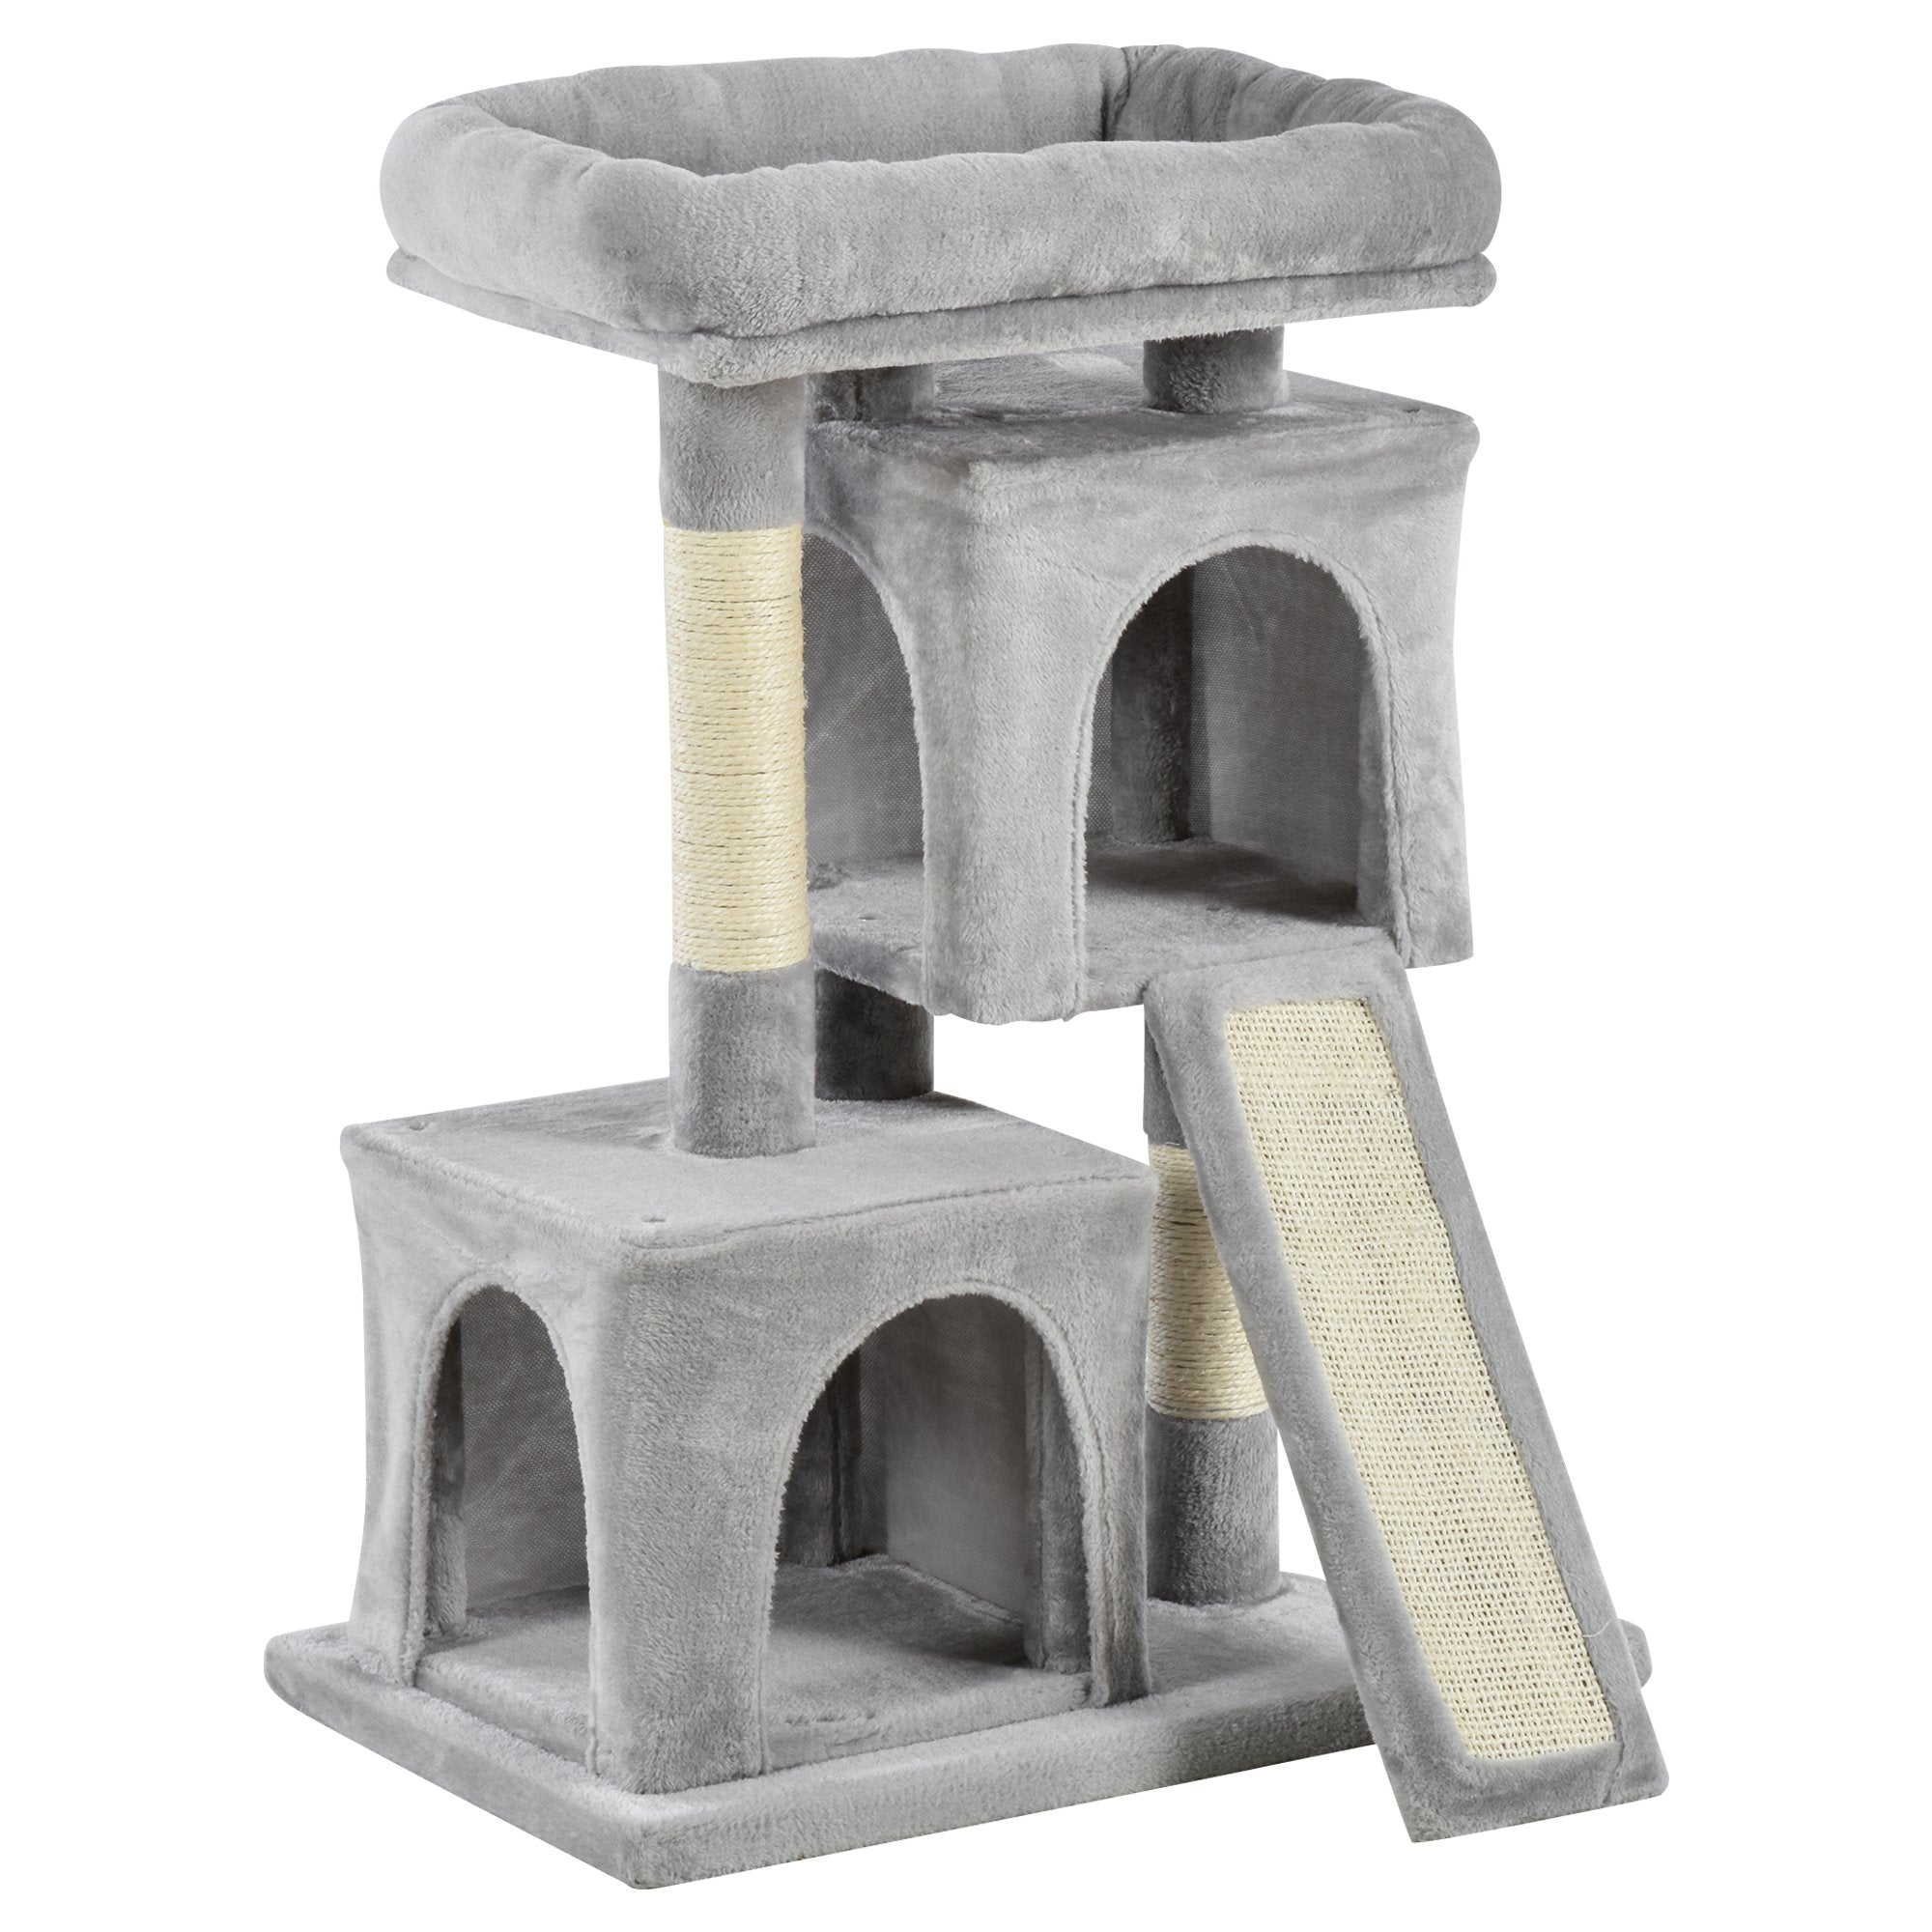 PawHut Cat Rest & Play Activity Tree w/ 2 House Perch Scratching Post Grey  | TJ Hughes